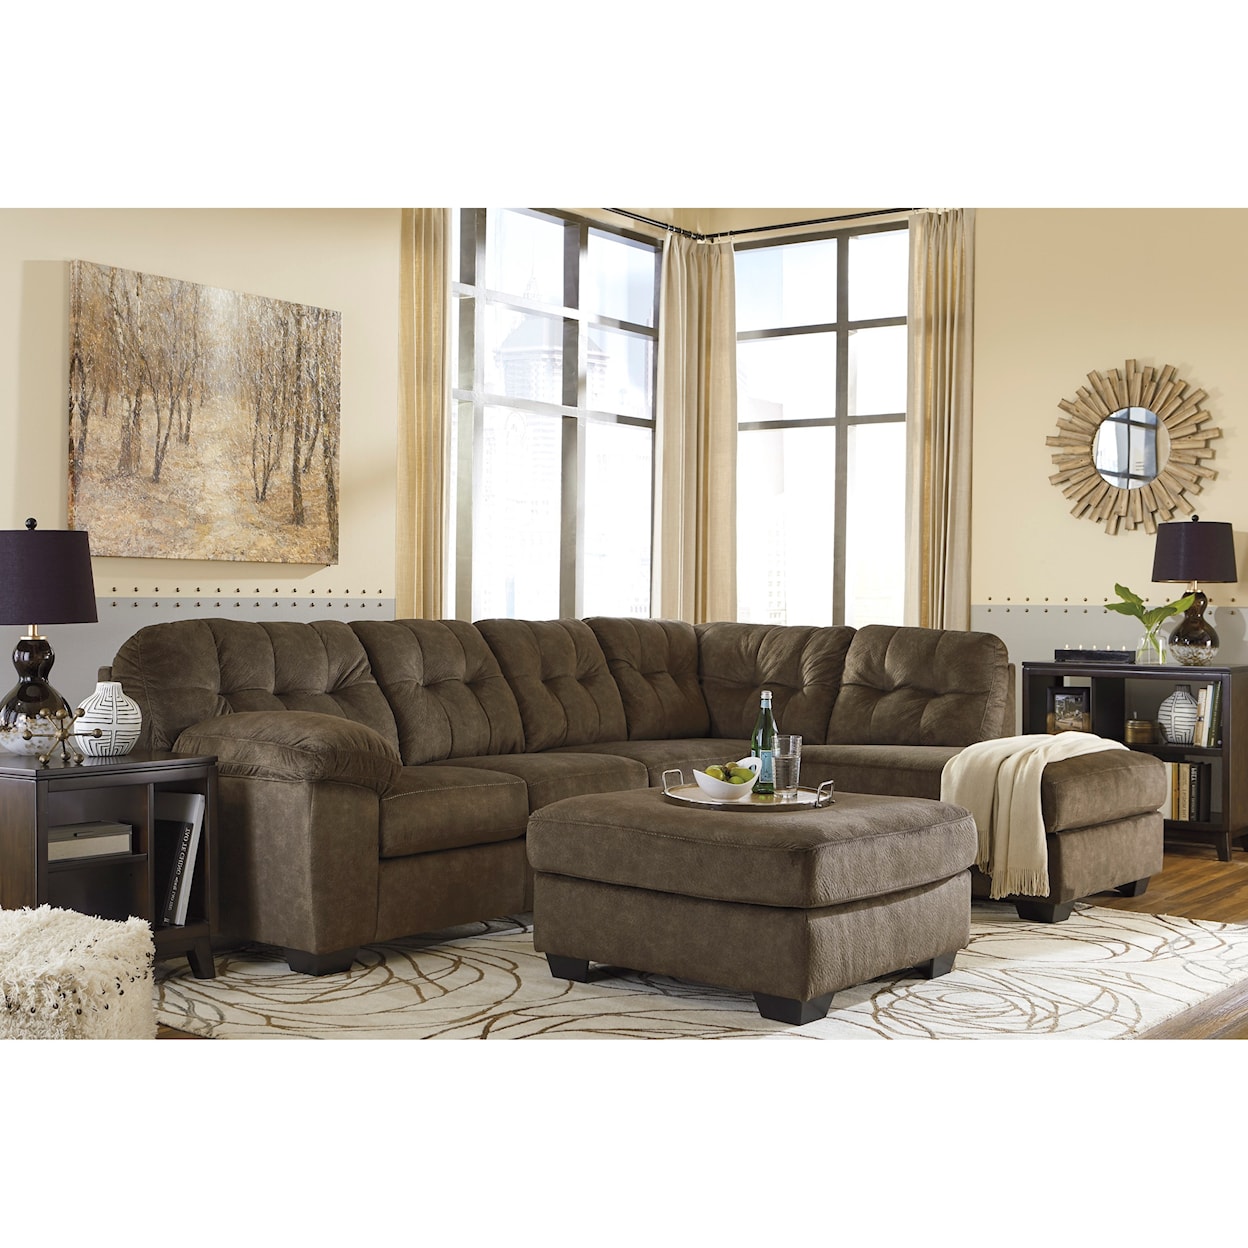 Benchcraft Accrington Sectional with Right Chaise & Queen Sleeper